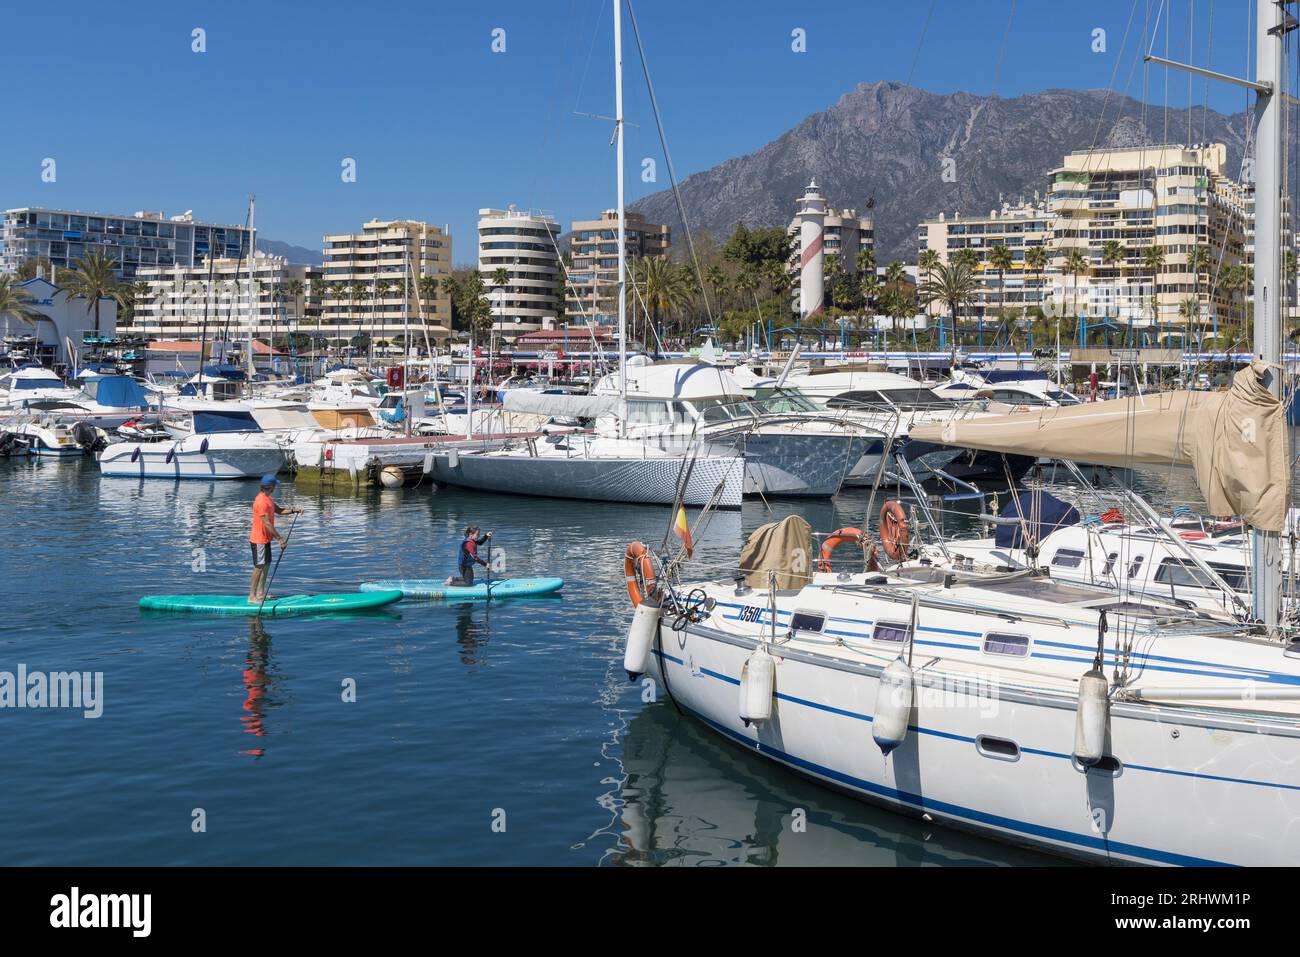 Puerto Deportivo or Sports Harbour on Marbella town's waterfront. Marbella, Costa del Sol, Malaga Province, Andalusia, southern Spain.  Man and child Stock Photo